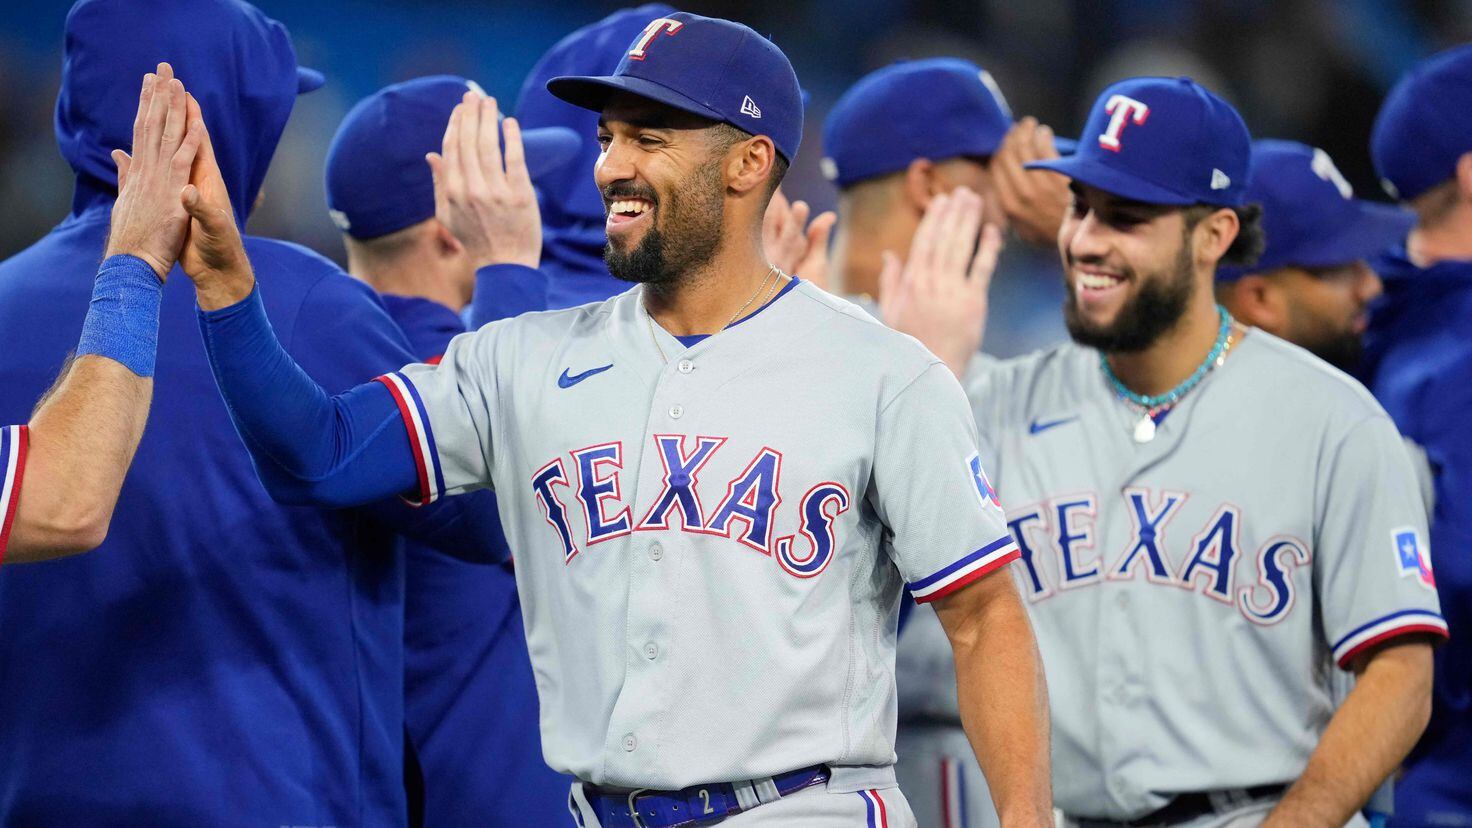 Rangers' Semien rips double after forgetting at-bat